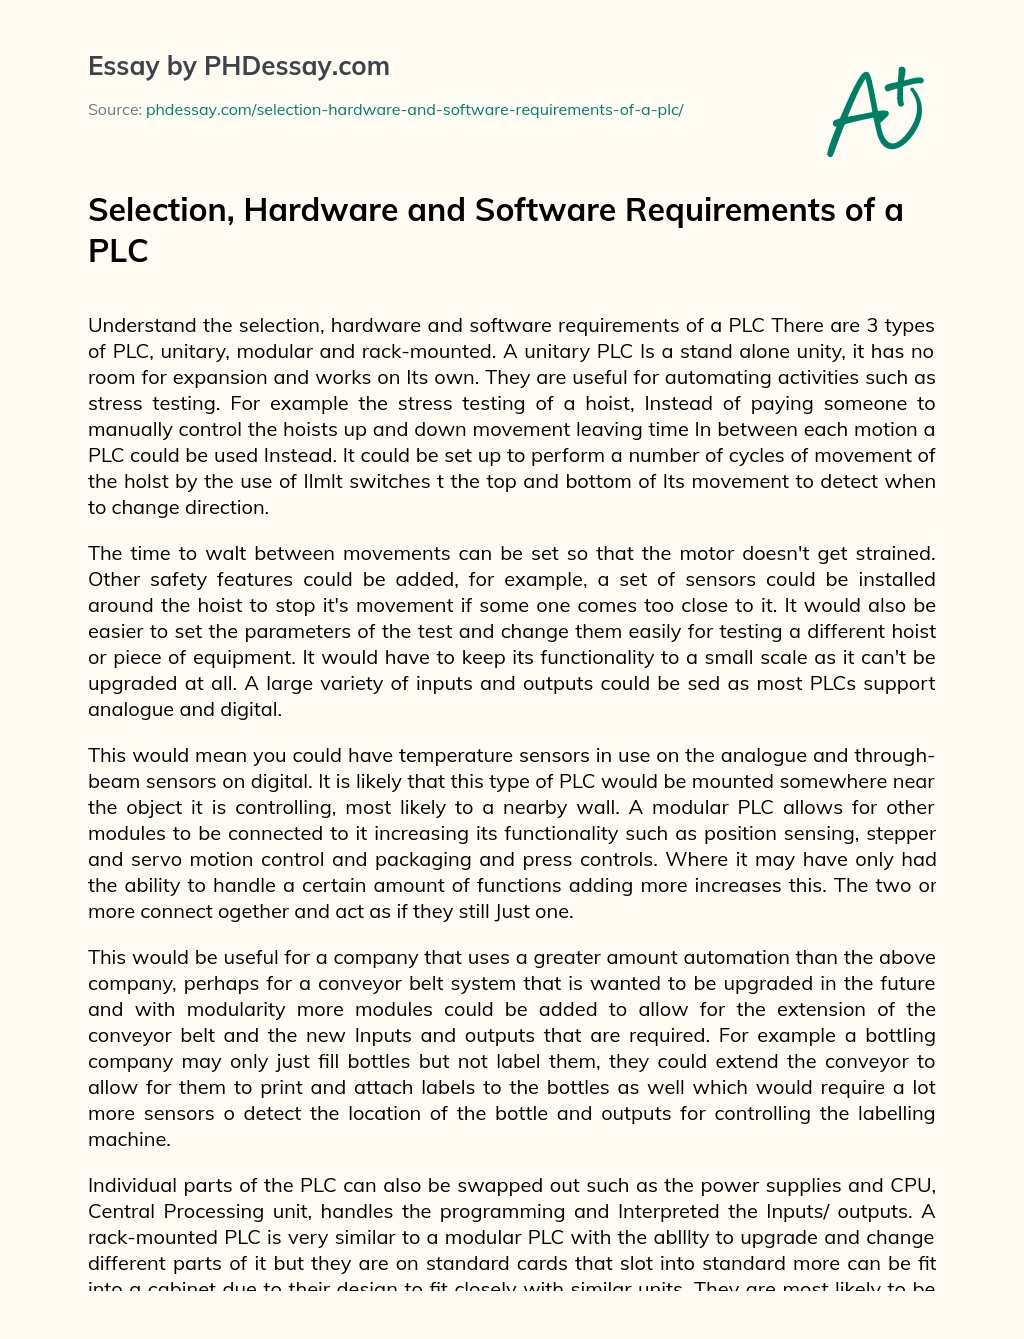 Selection, Hardware and Software Requirements of a PLC essay